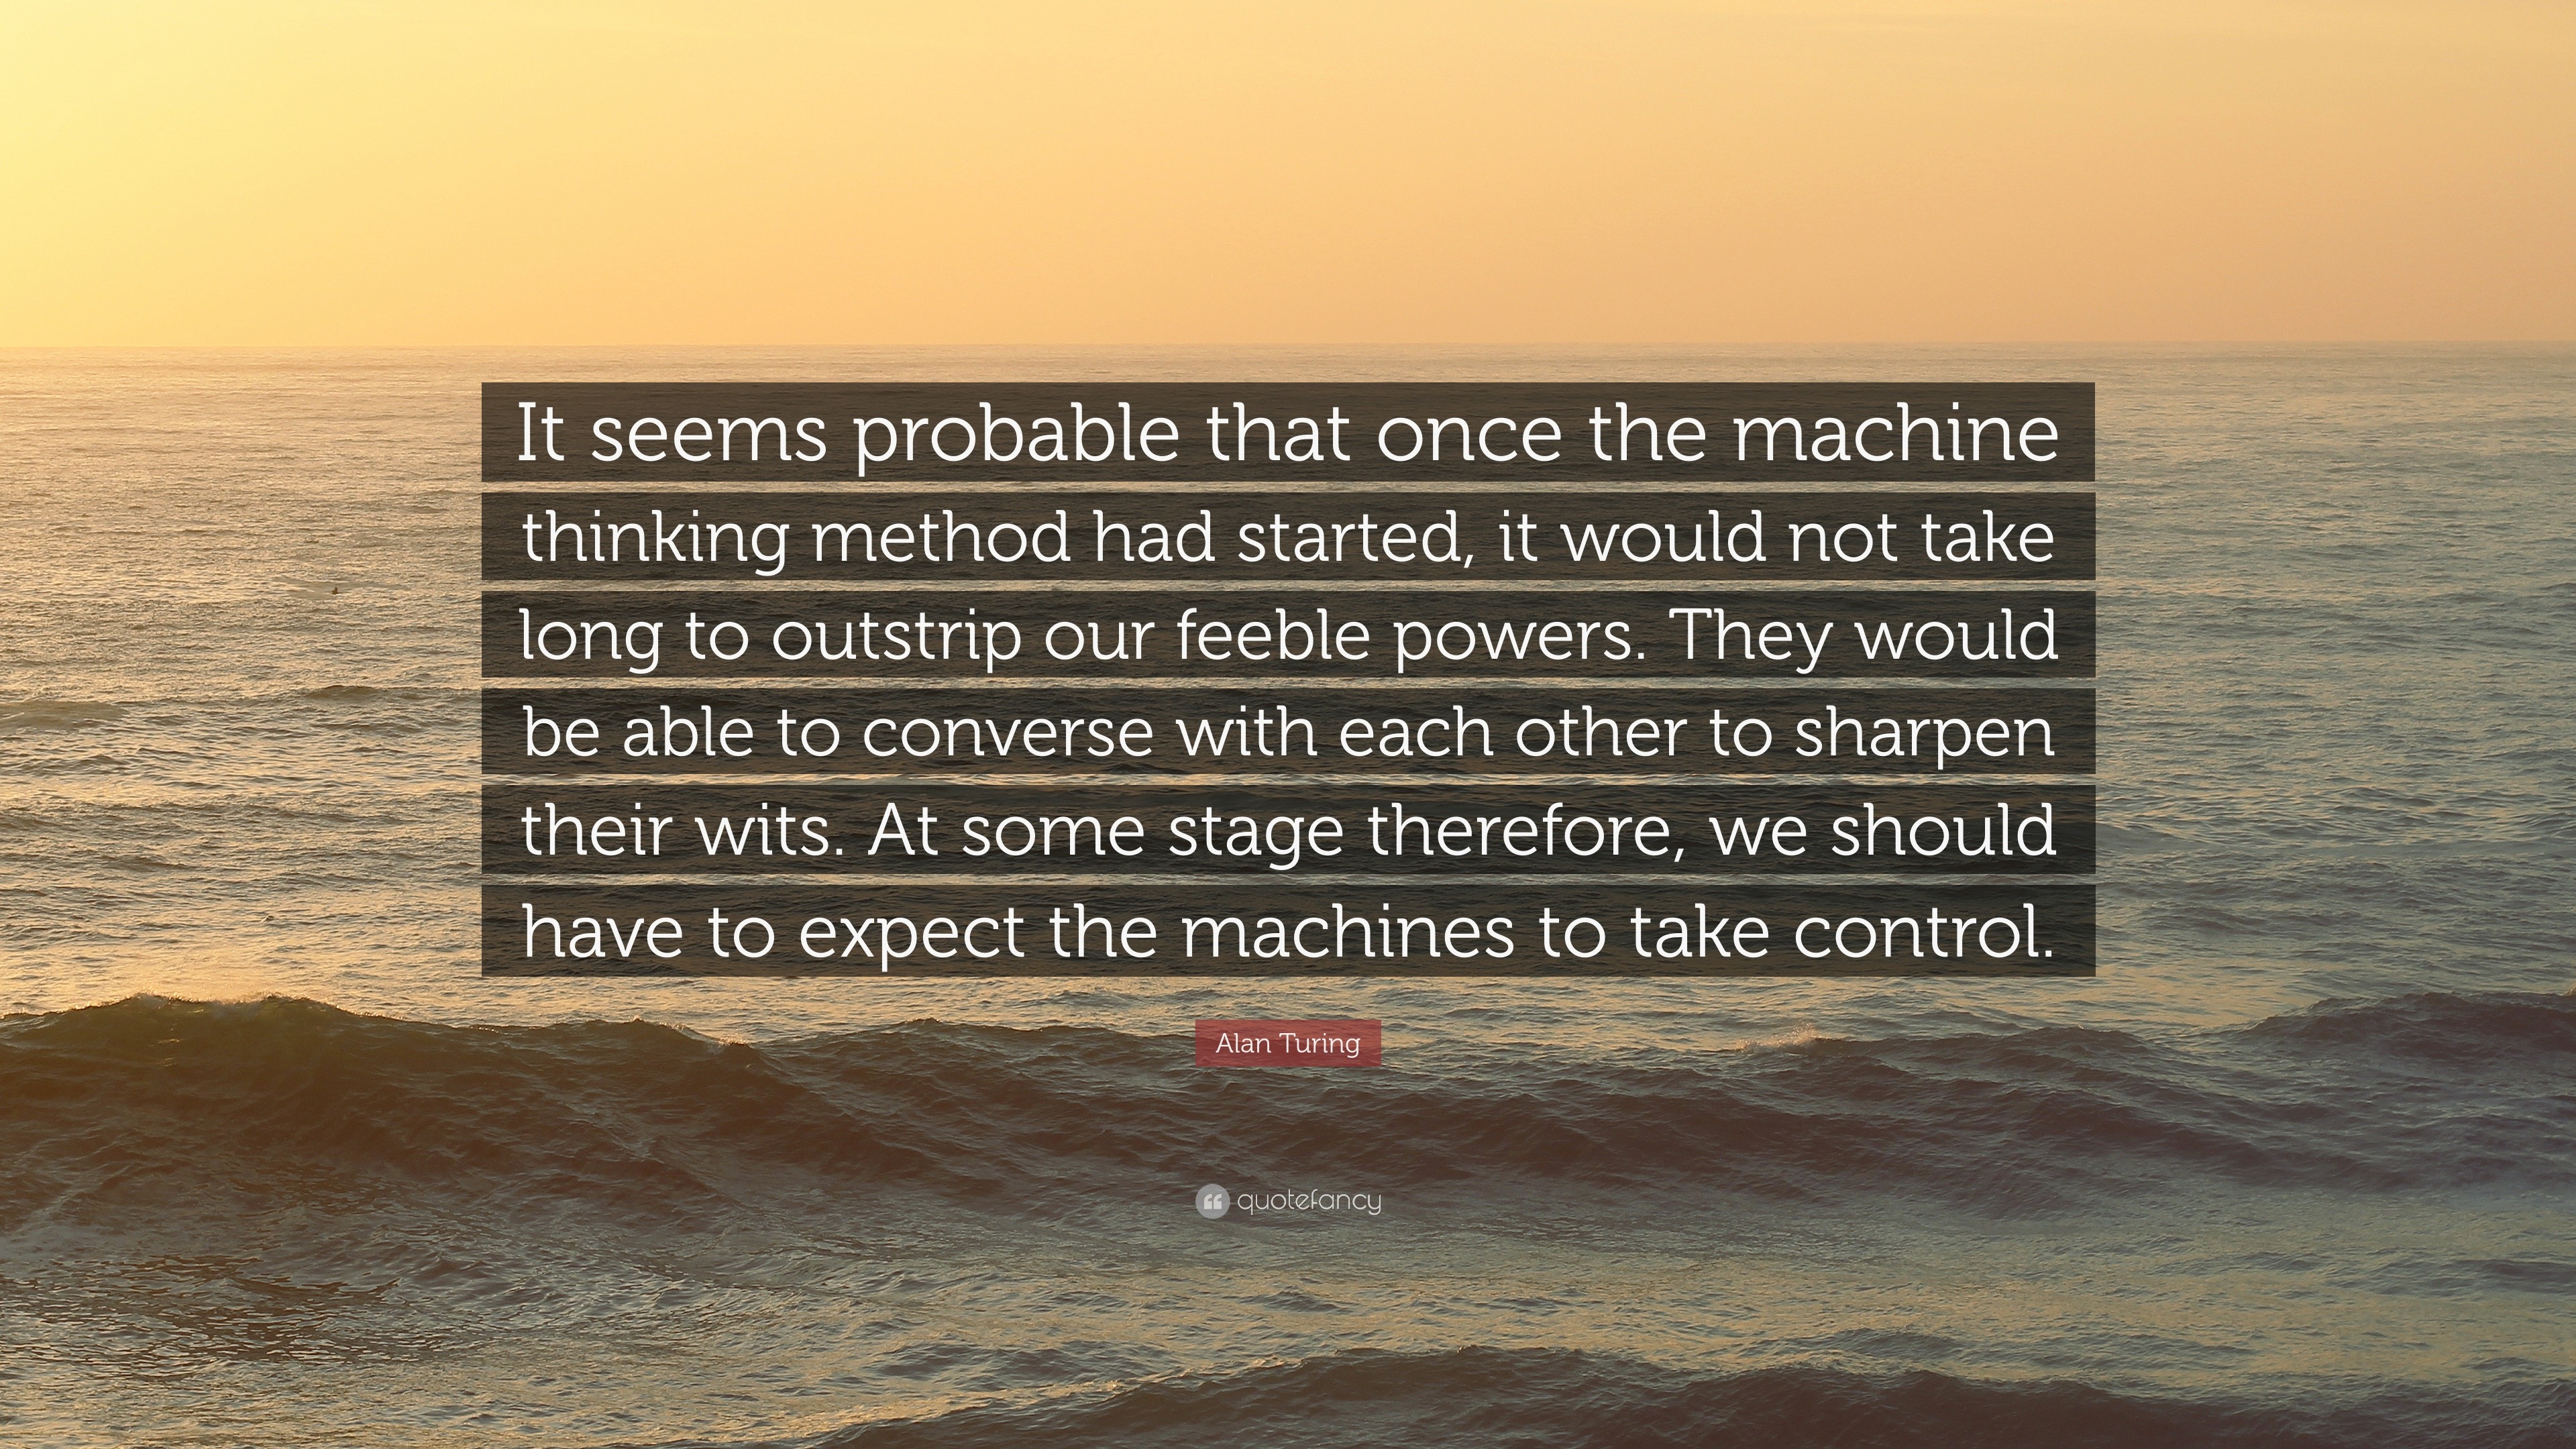 Alan Turing Quote: "It seems probable that once the machine thinking method had started, it ...